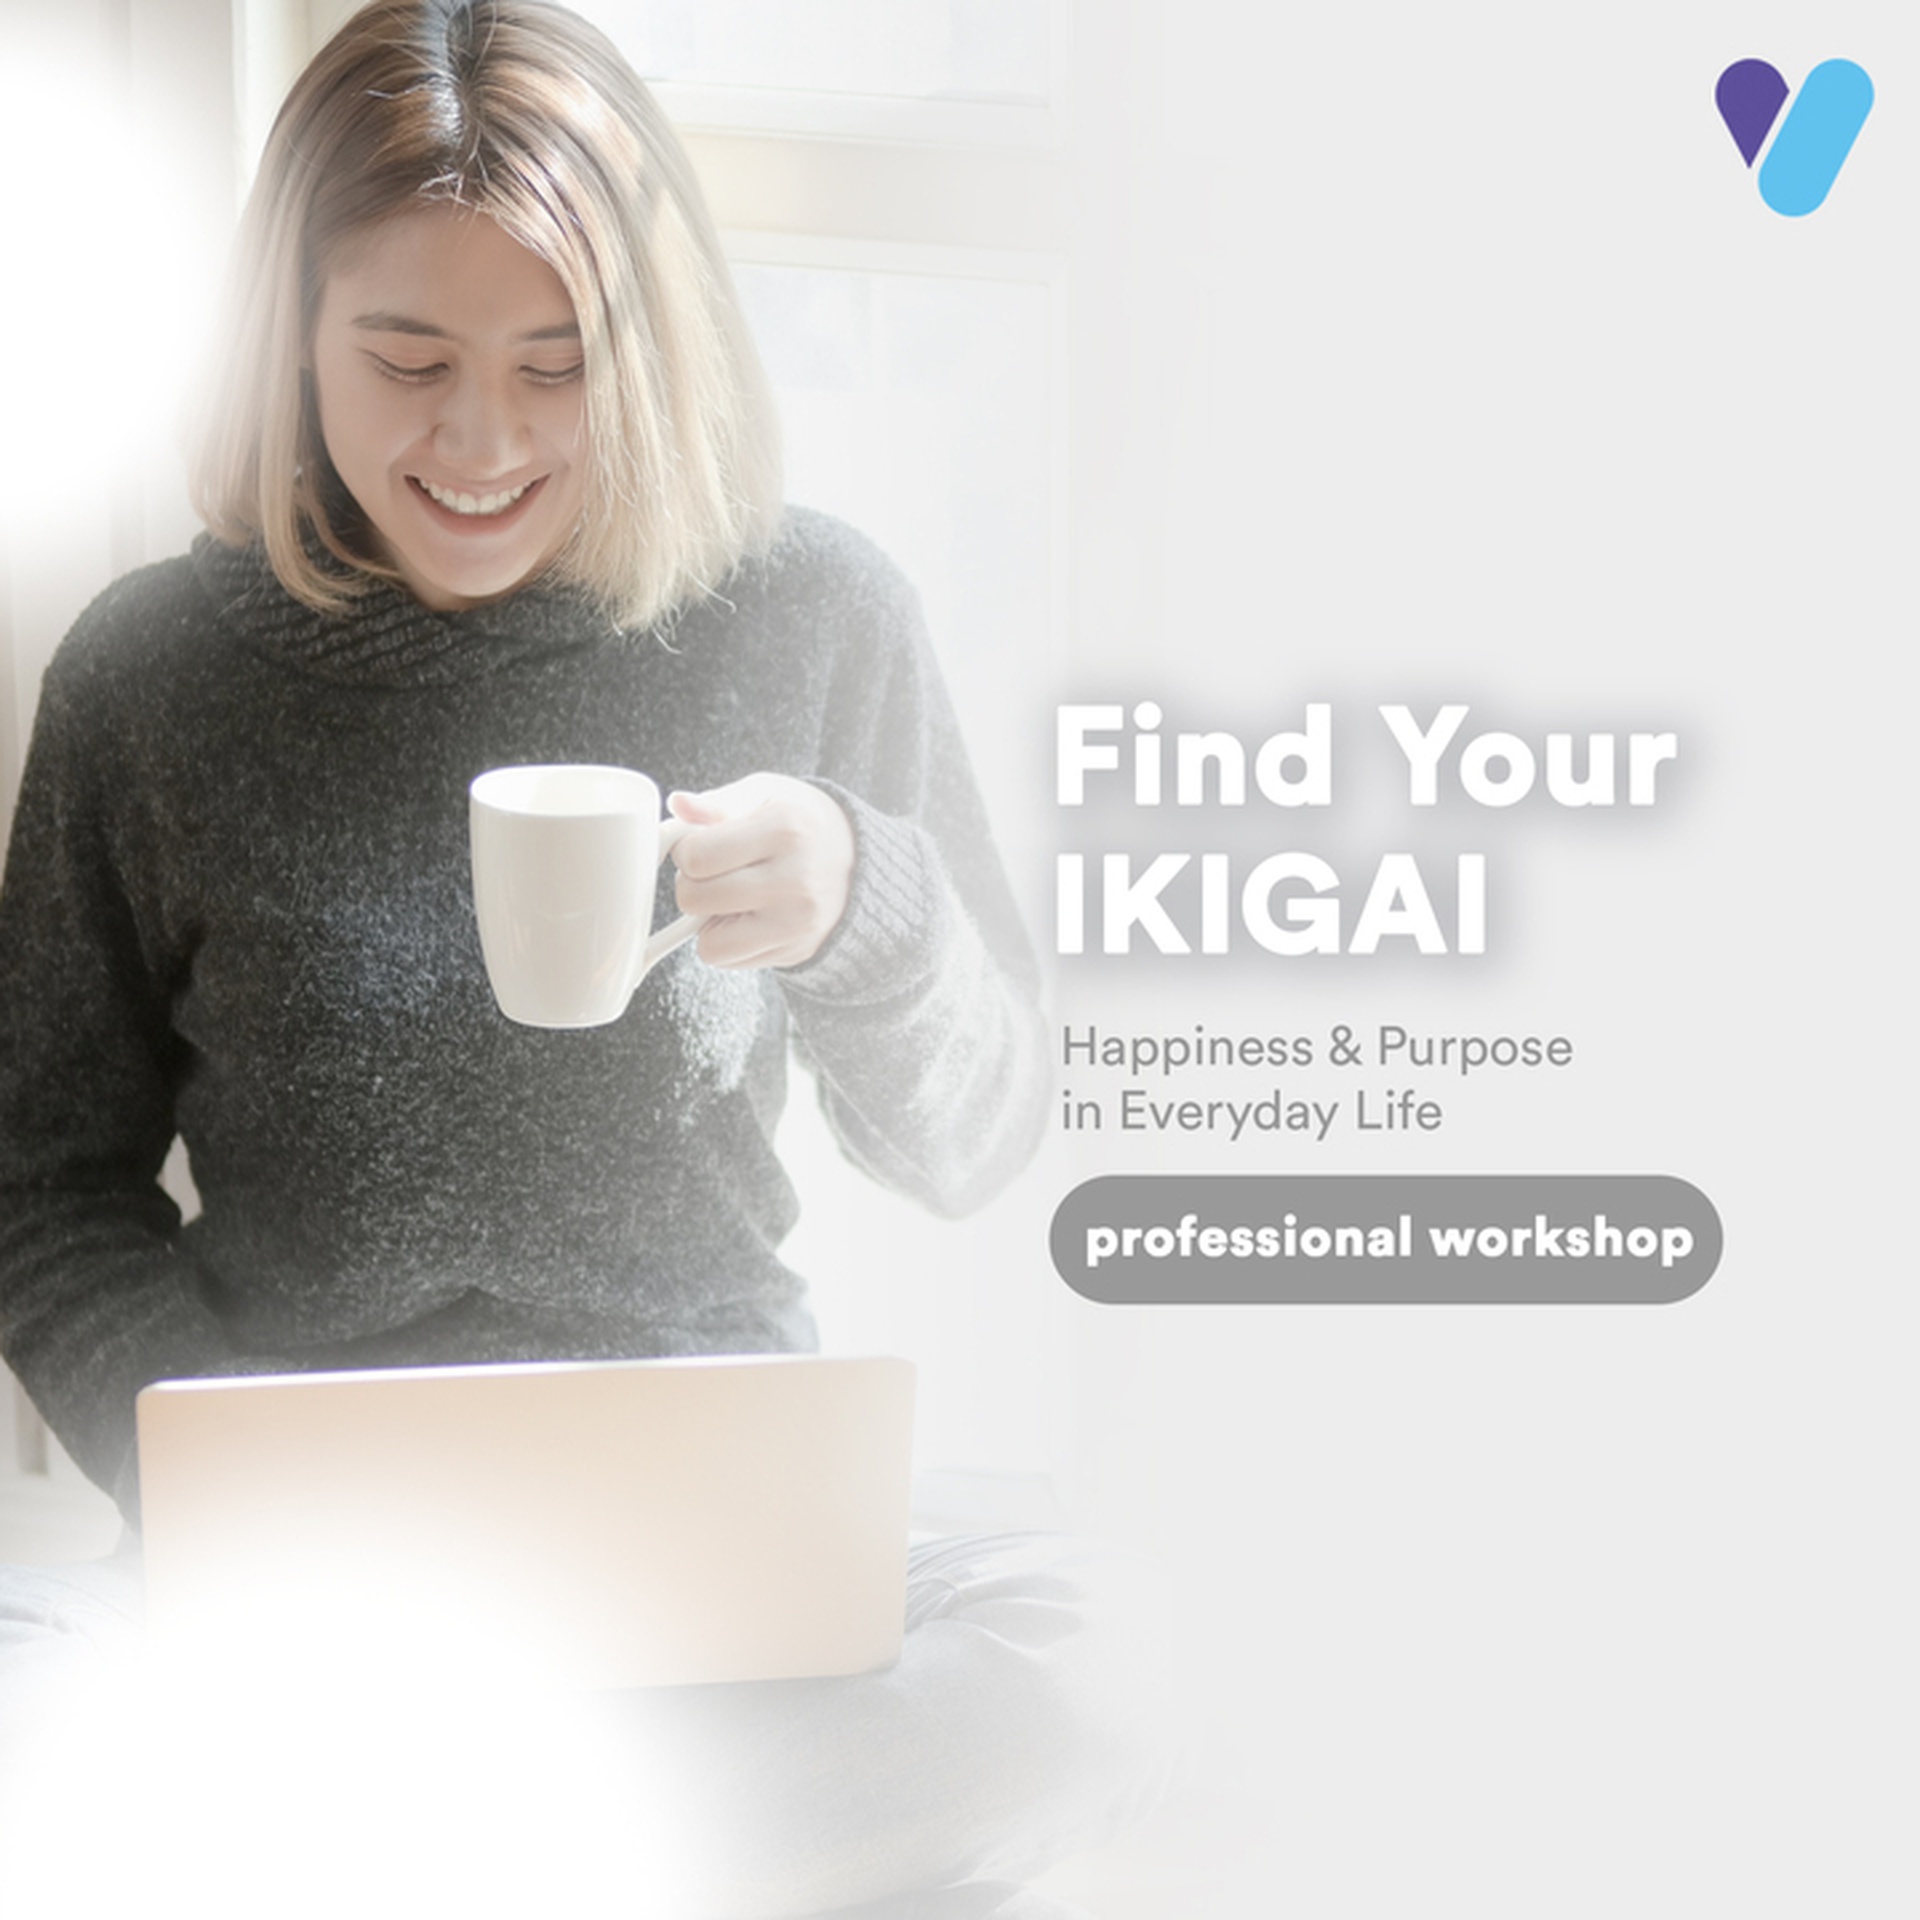 Find Your Ikigai: Happiness & Purpose in Everyday Life